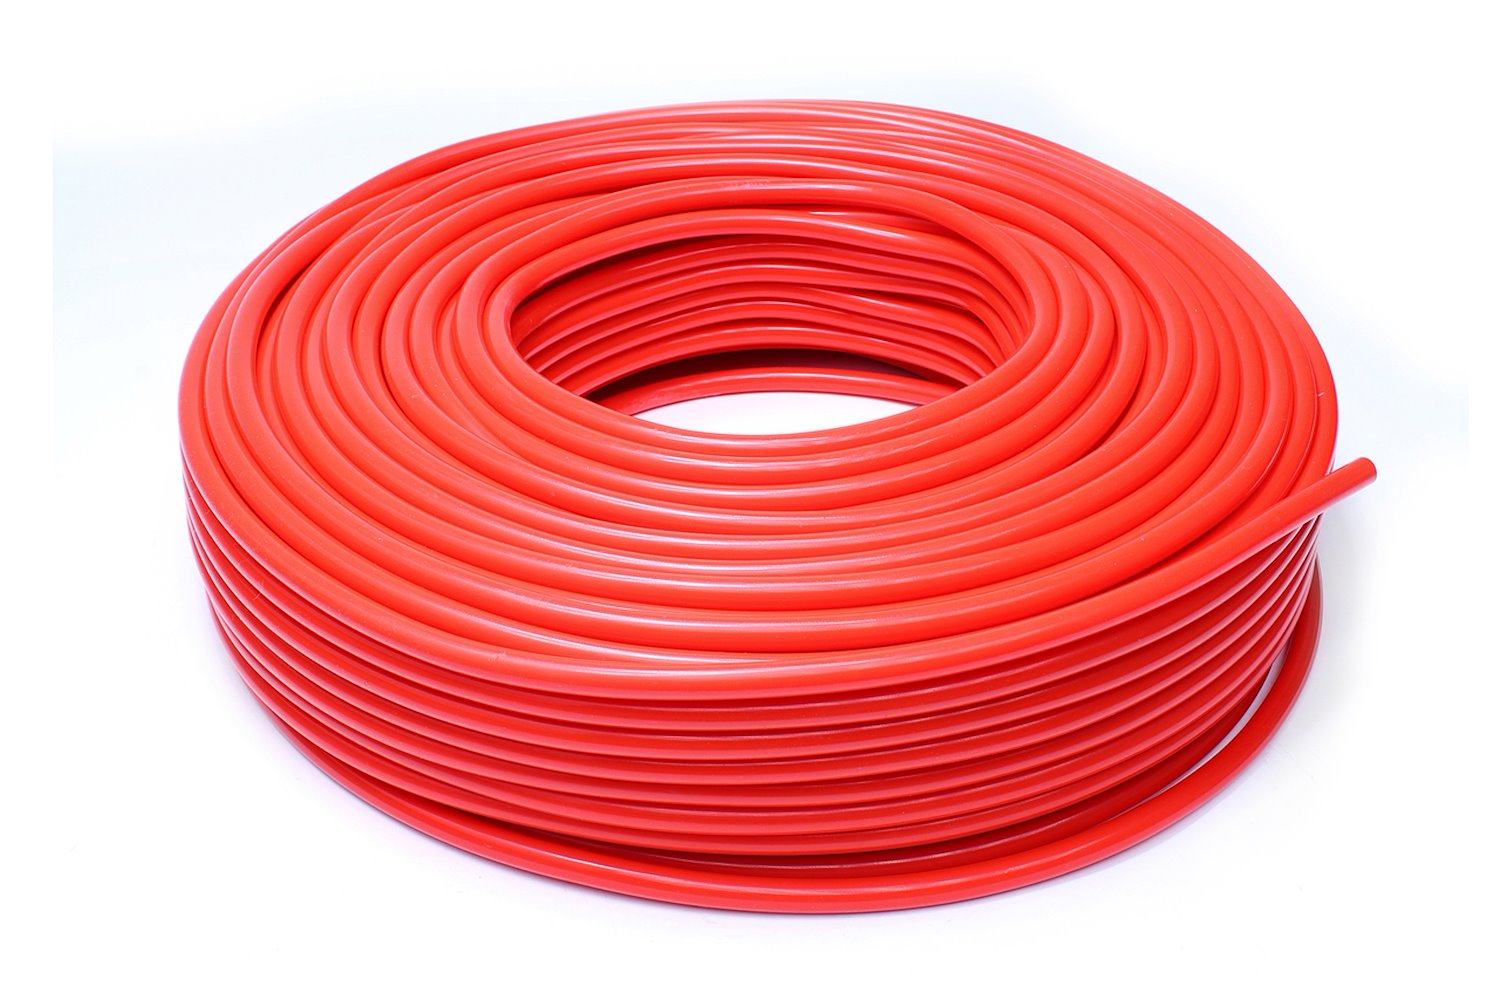 HTSVH3TW-REDx100 High-Temperature Silicone Vacuum Hose Tubing, 1/8 in. ID, 100 ft. Roll, Red